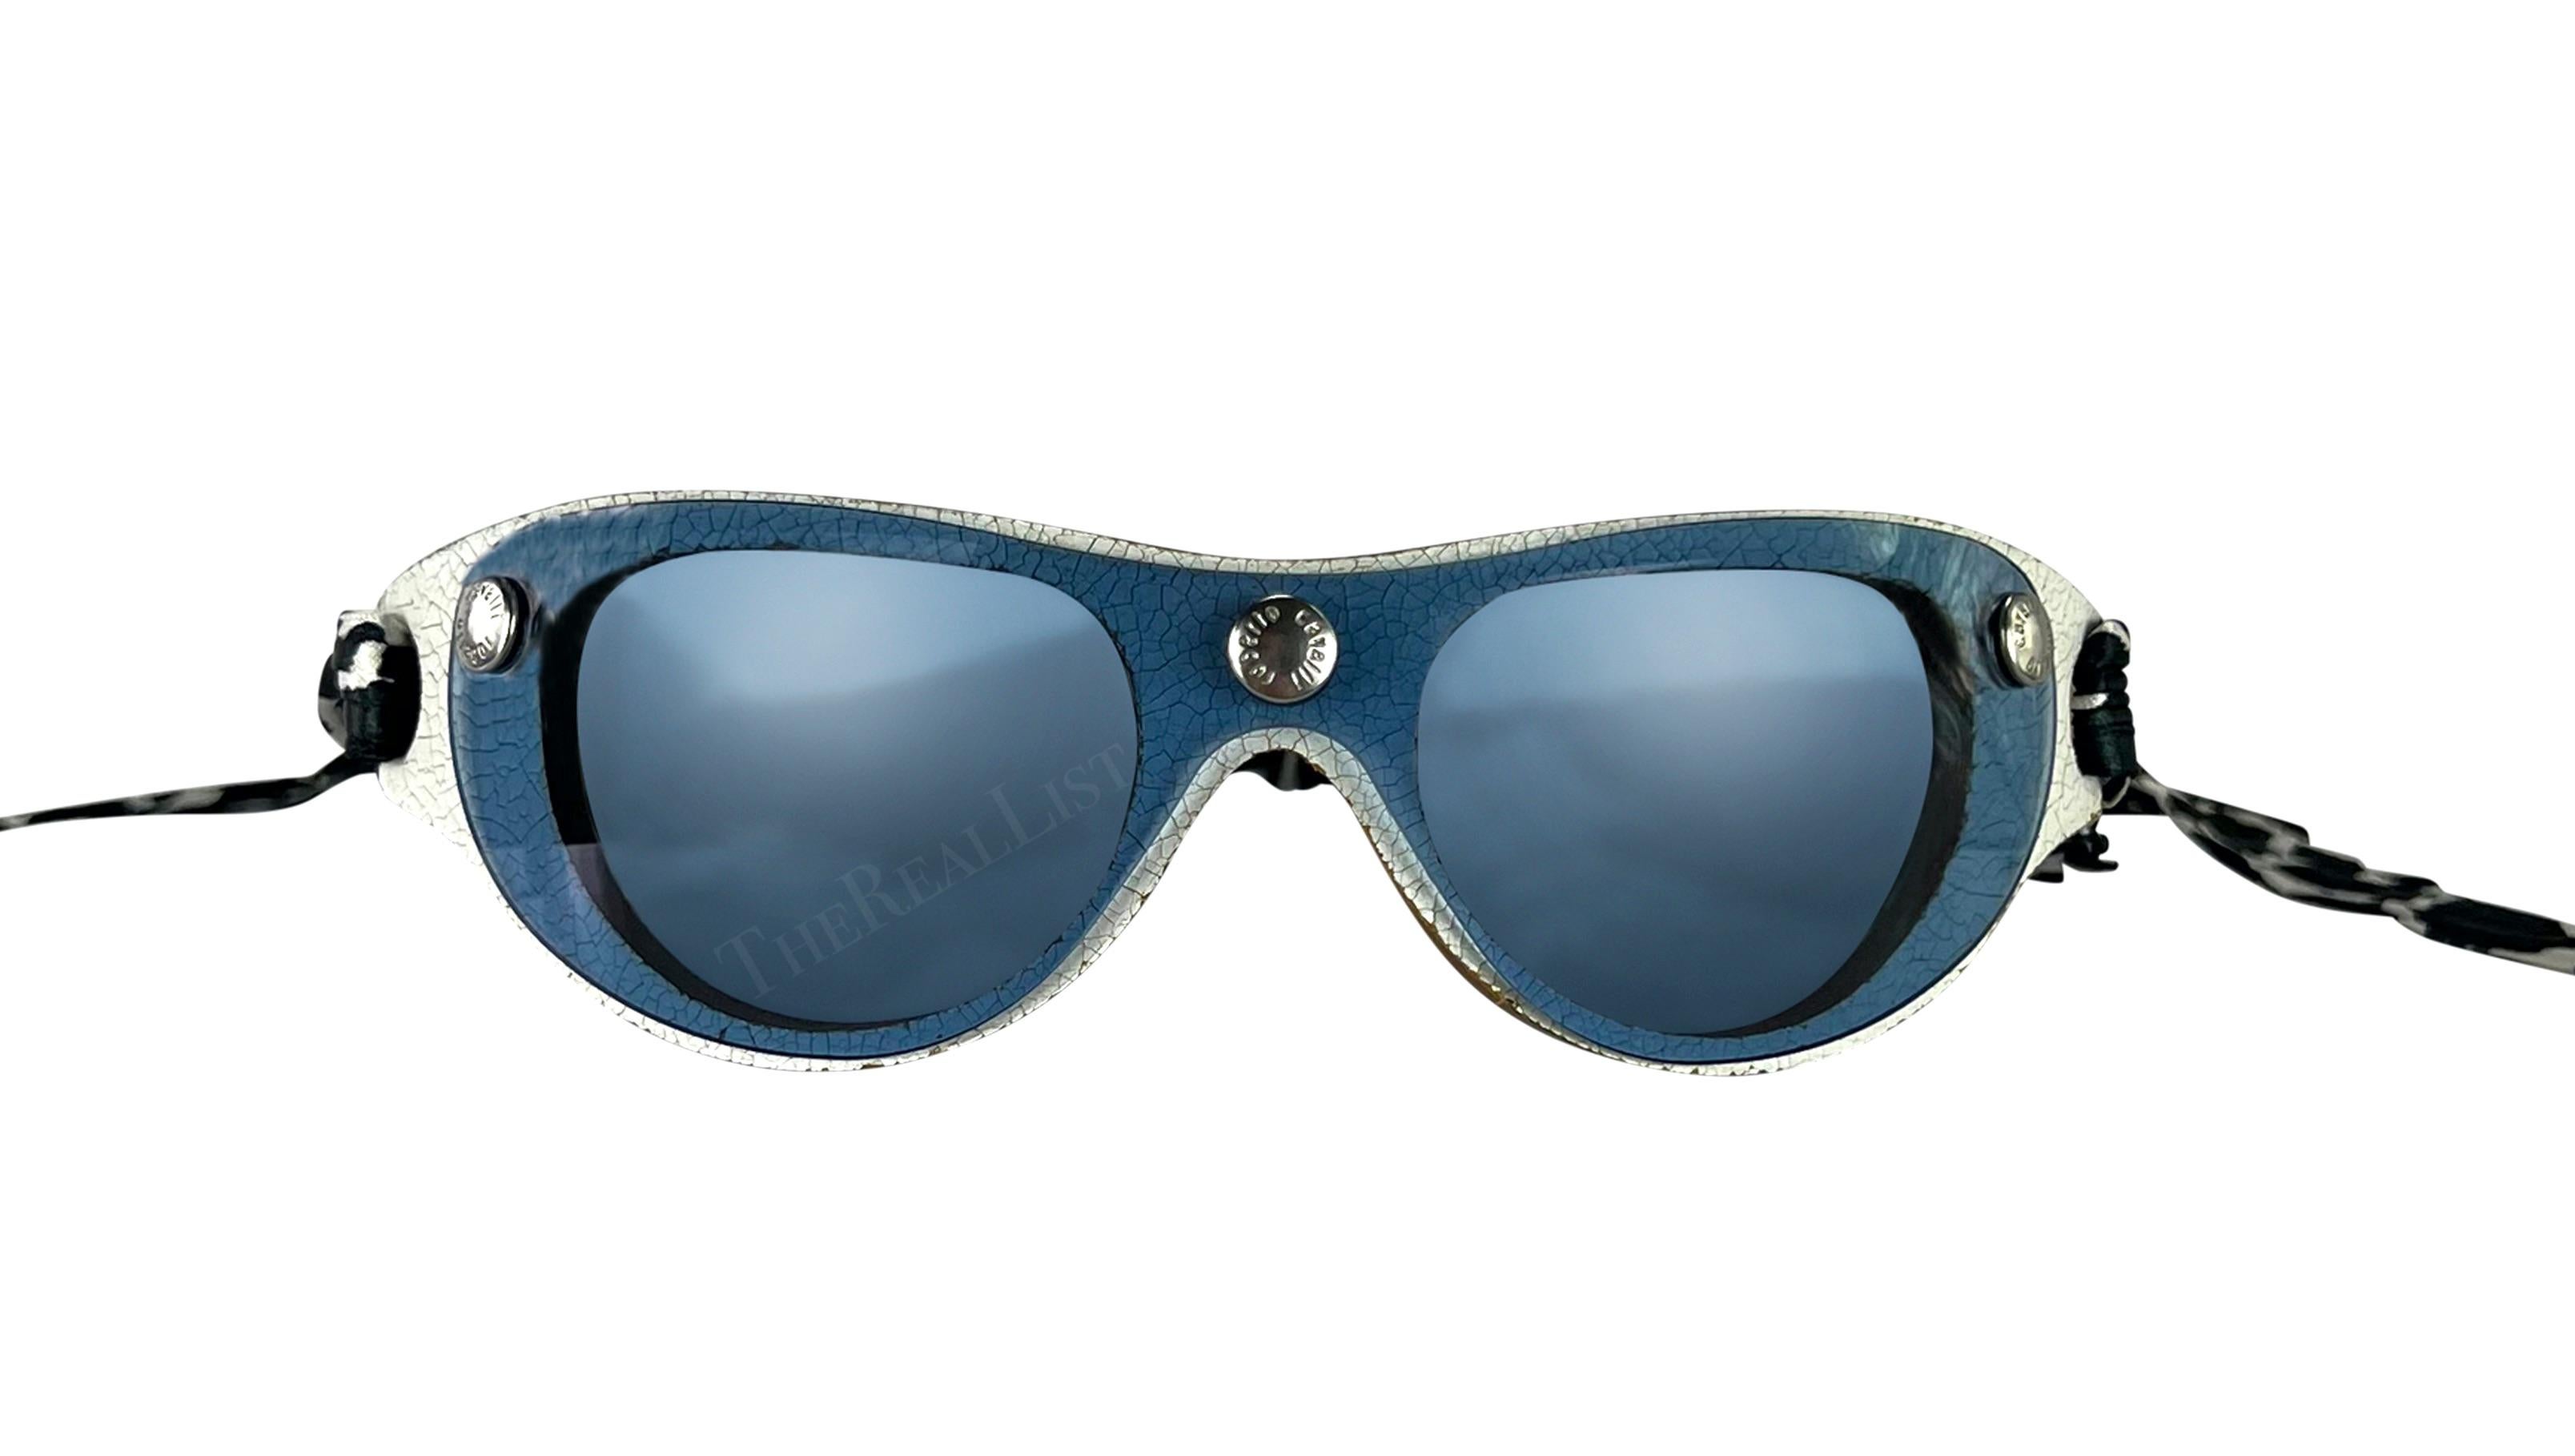 S/S 2001 Roberto Cavalli Ad Blue Shield Silk Scarf Wrap Sunglasses In Excellent Condition For Sale In West Hollywood, CA